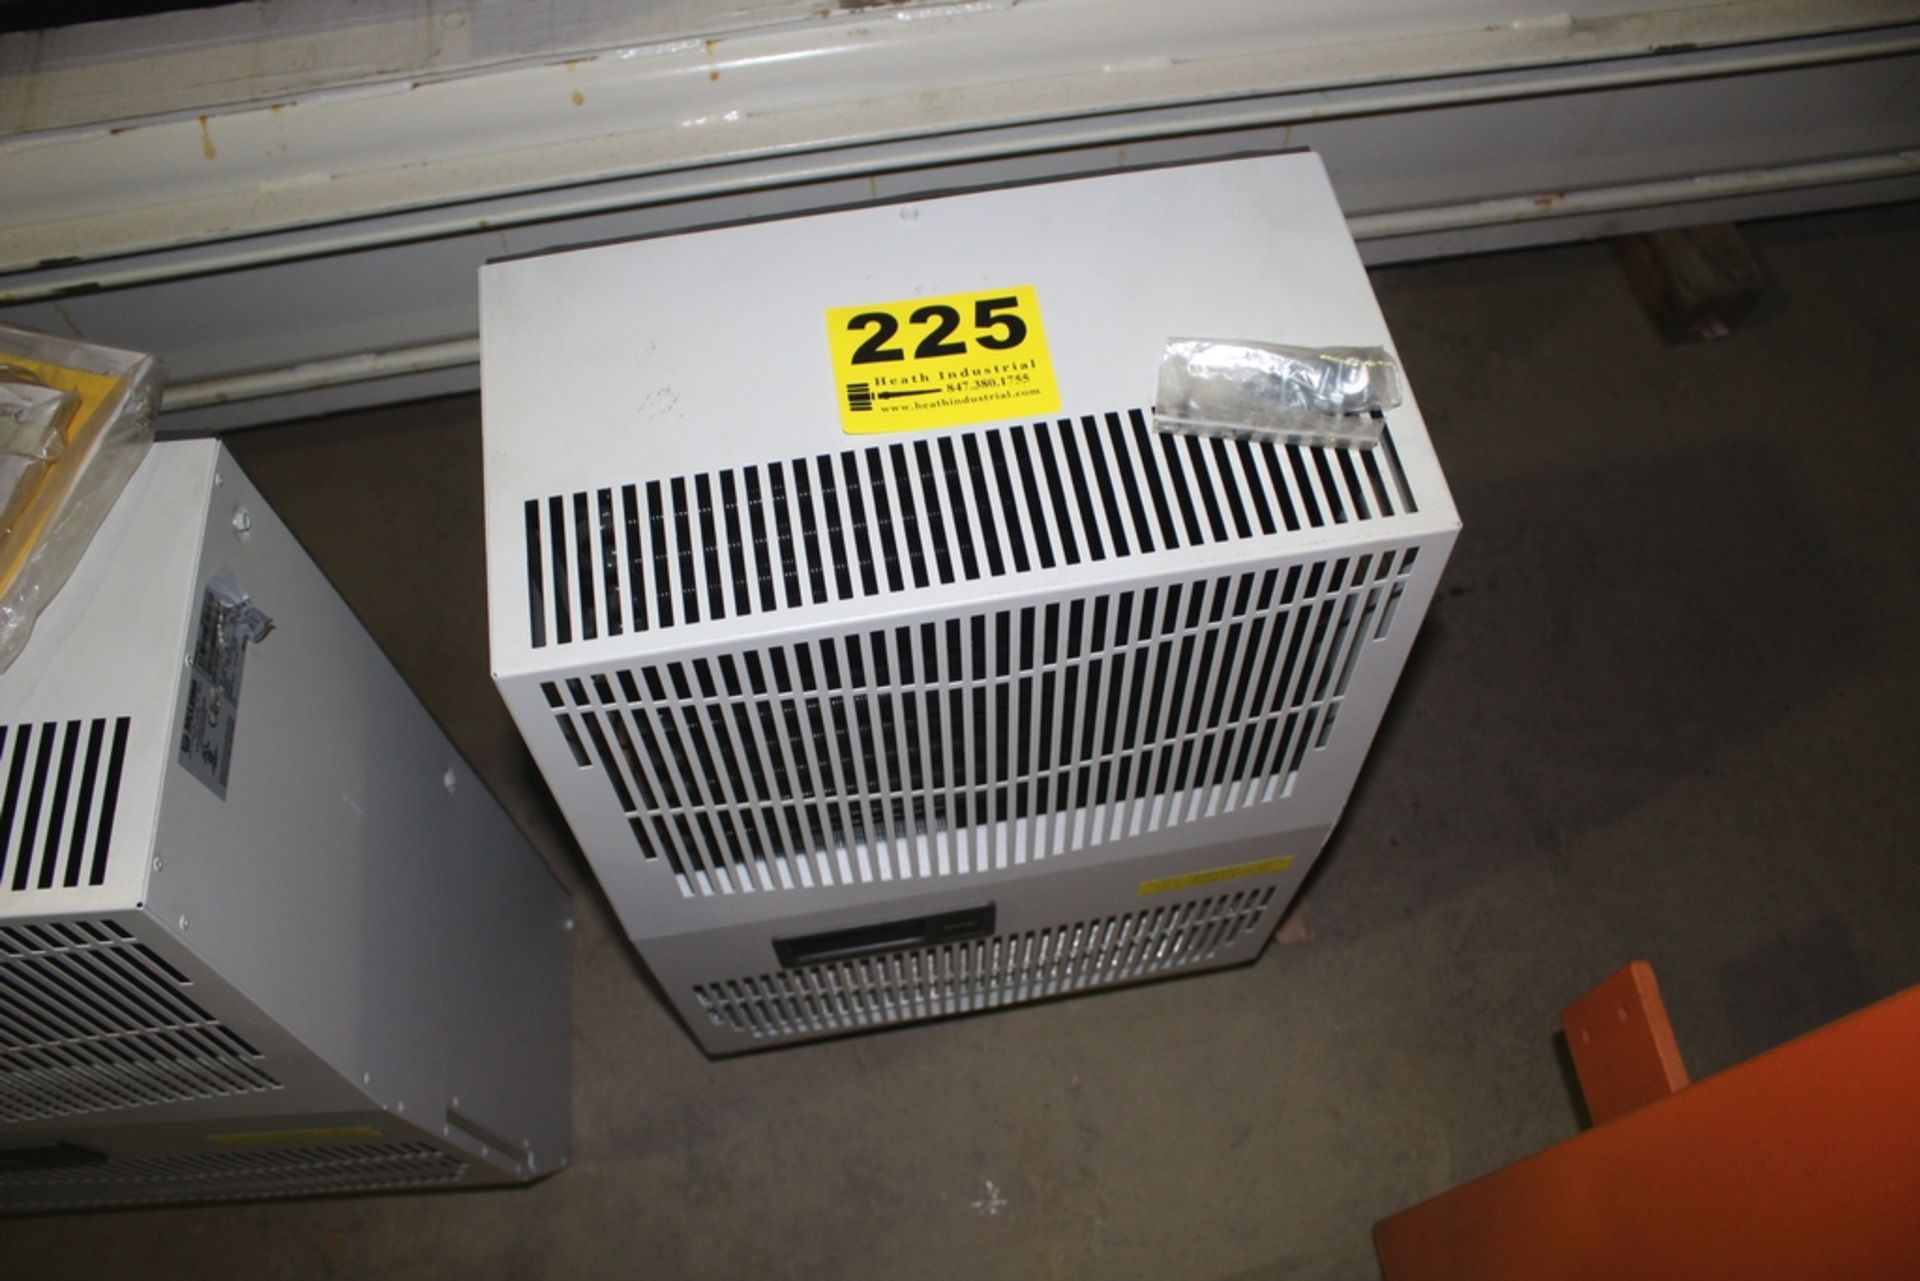 HOFFMAN SPECTRACOOL MODEL G280446G050 AIR CONDITIONING UNIT, 460V 3 PHASE 4,900 BTU / HOUR